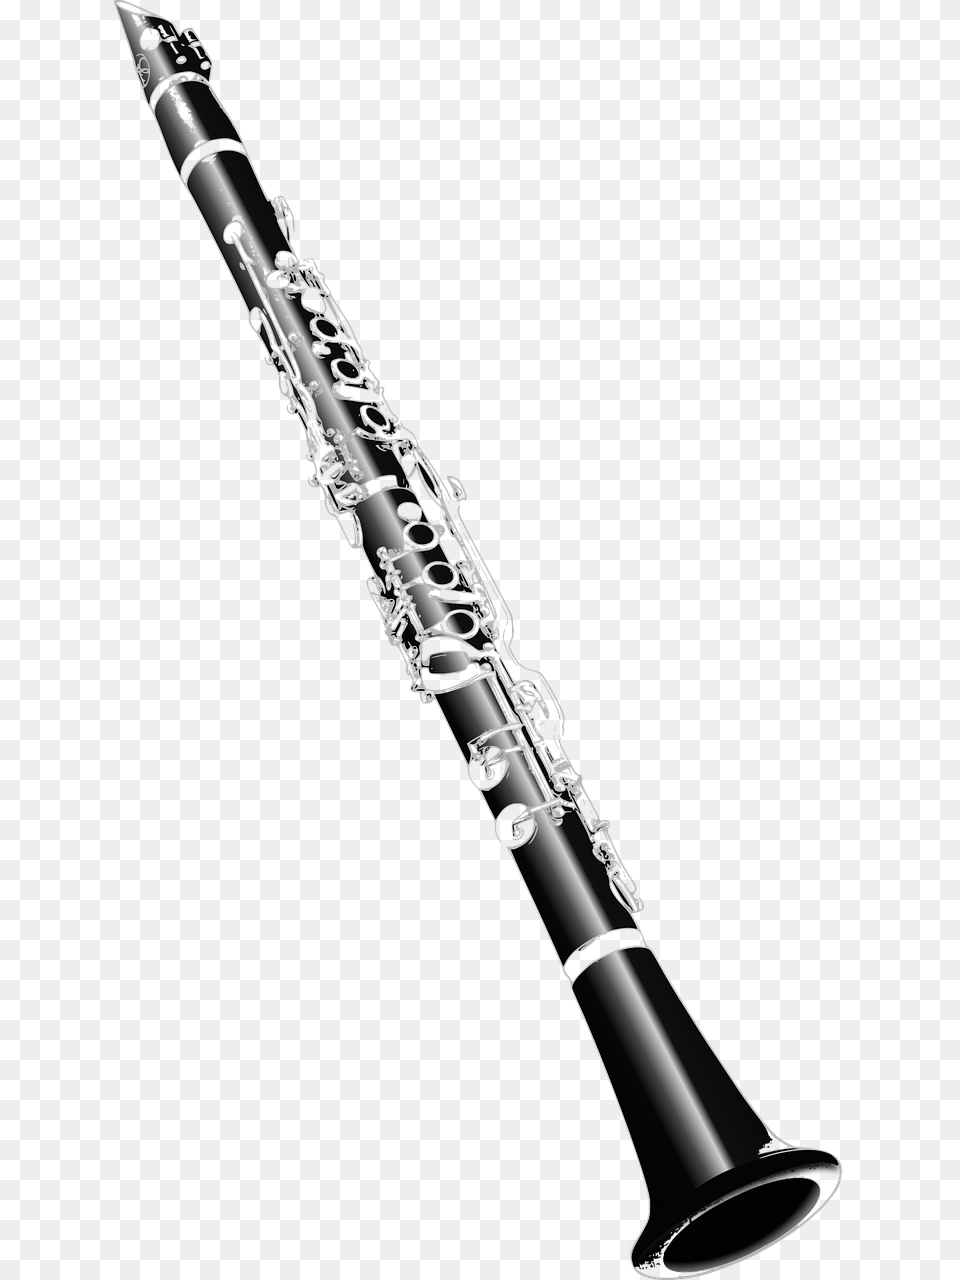 Pre Loved Clarinets Piccolo Clarinet, Musical Instrument, Oboe, Smoke Pipe Free Png